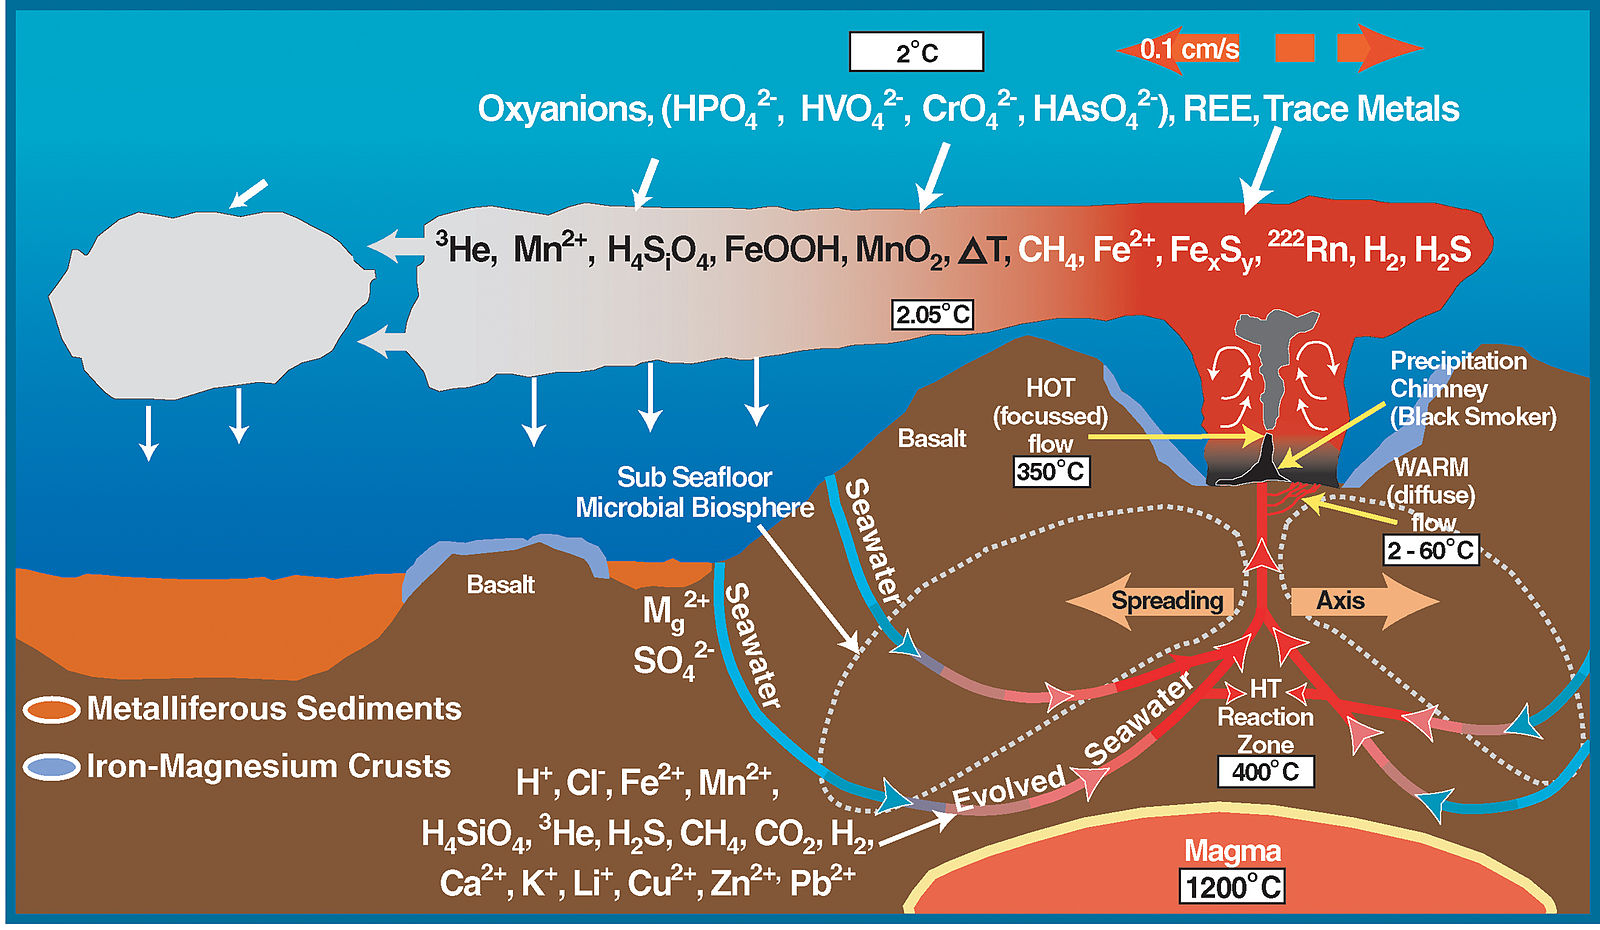 Diagram showing a cross section of a mid-ocean ridge underwater. Volcanic heat is coming out of the mid-ocean ridge which is drawn like a cloud. Inside the cloud are many different chemicals. There are also arrows going from the water into the ridge, labeled "seawater" where it enters the ground and labeled "evolved seawater" as it reaches the mid-ocean ridge axis. The arrows are also labeled with many different chemicals. Deeper below the ridge is a red oval shape labeled "Magma 1200 degrees C."